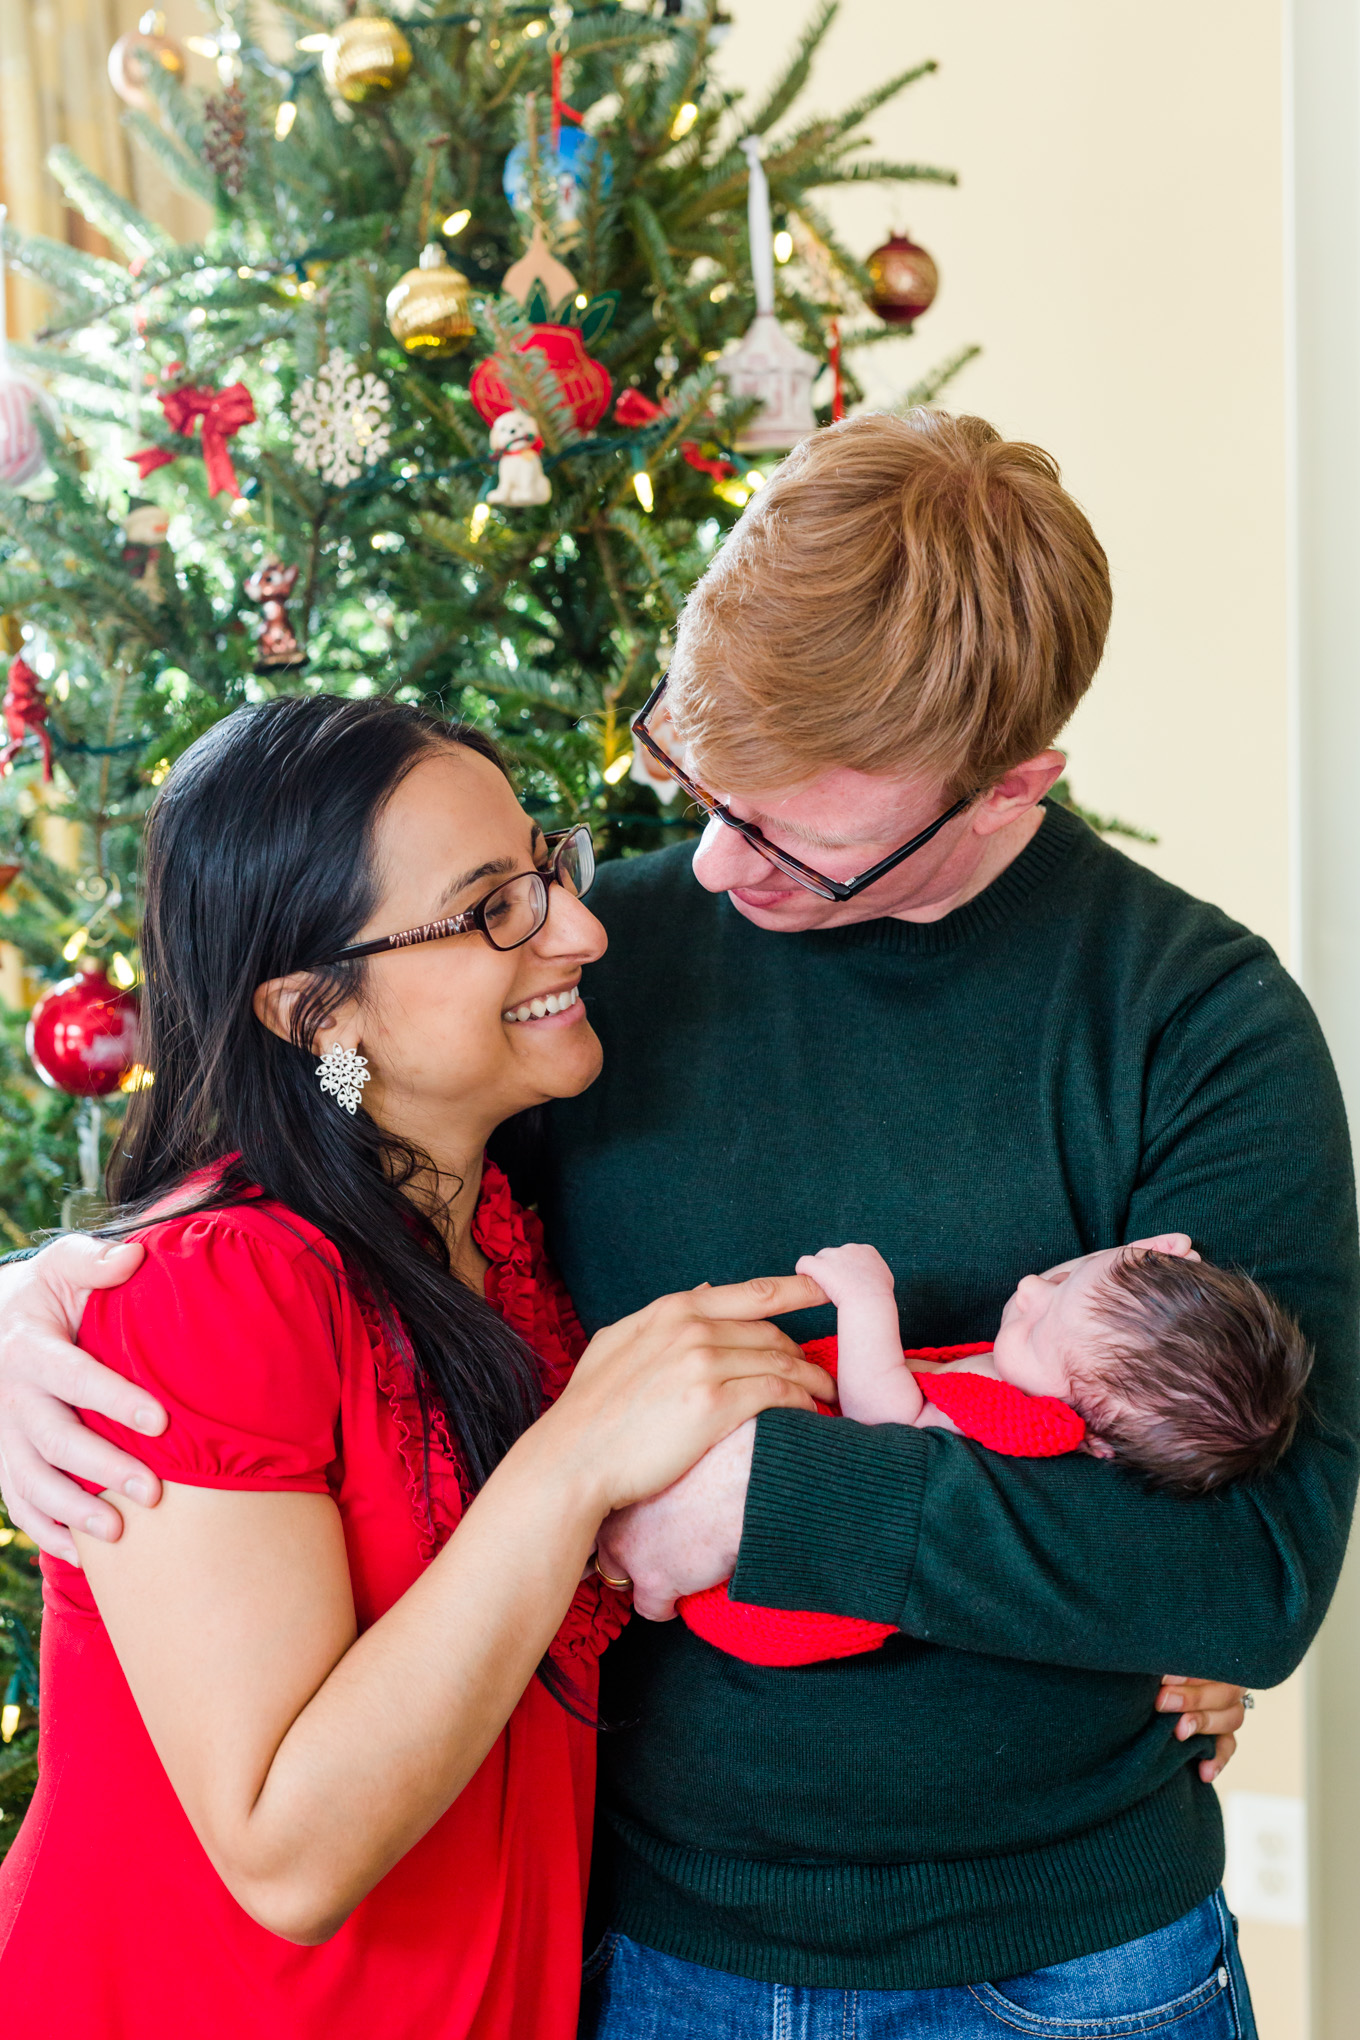 holiday newborn photos, newborn boy, baby boy, holiday photos, Christmas baby, brown haired baby, family of three, Christmas colors